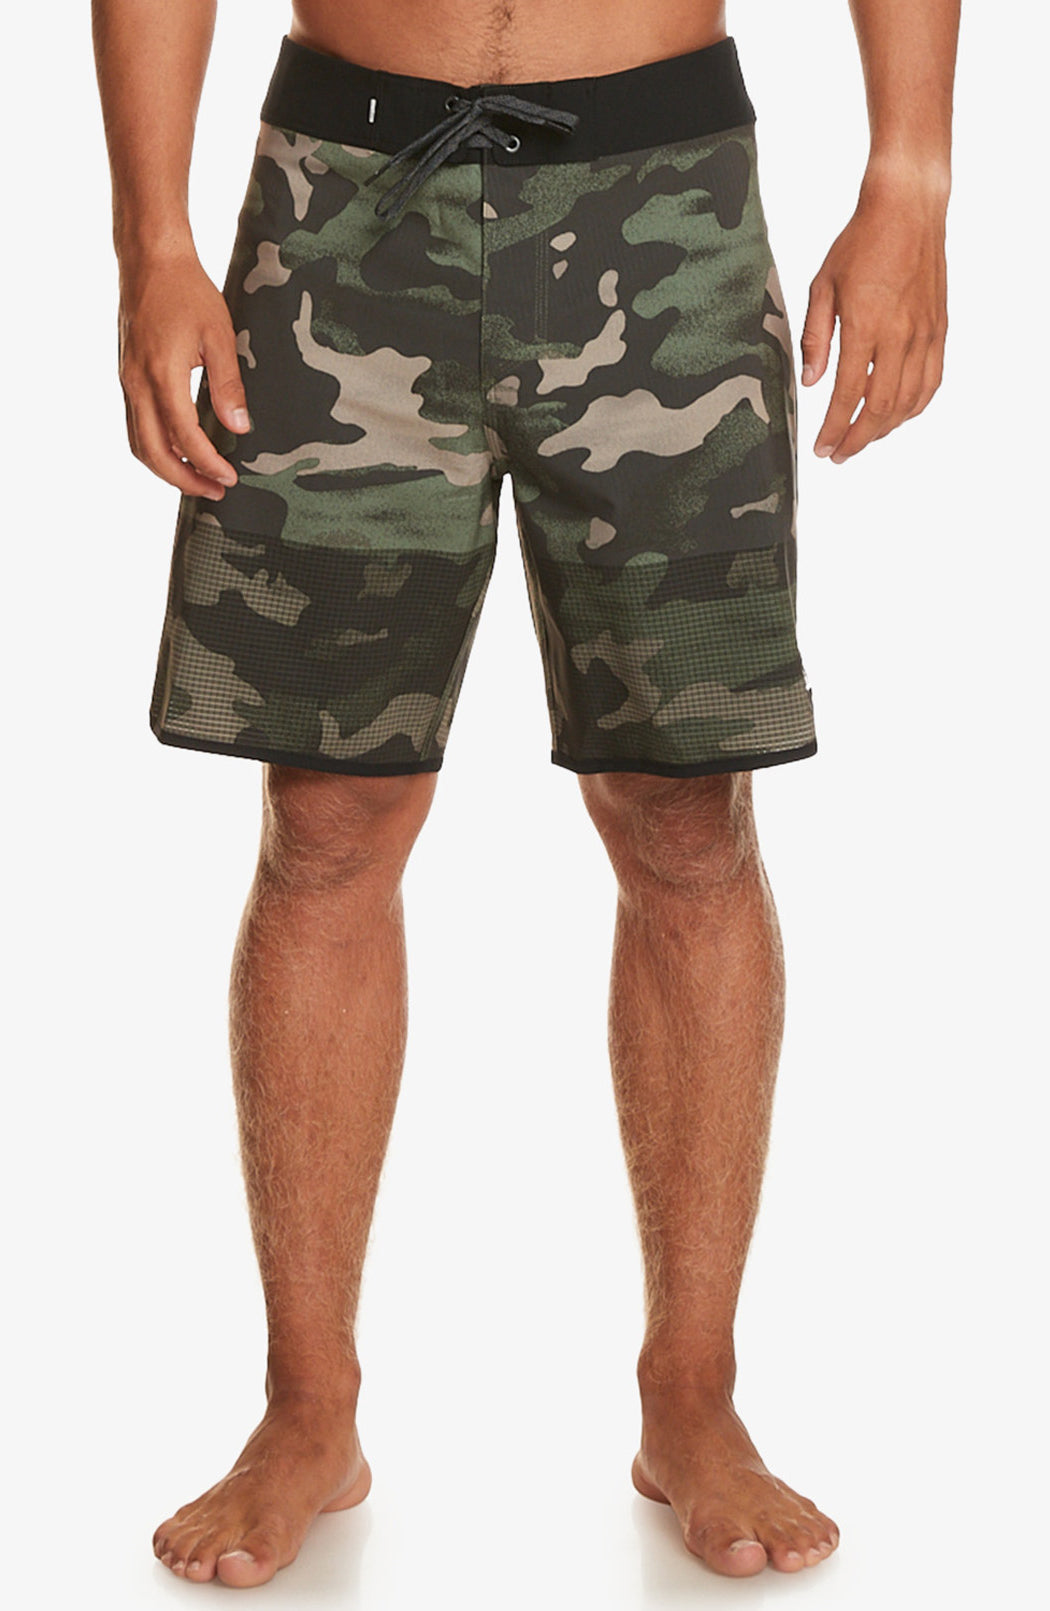 Quiksilver: Highlite Scallop19" Boardshorts